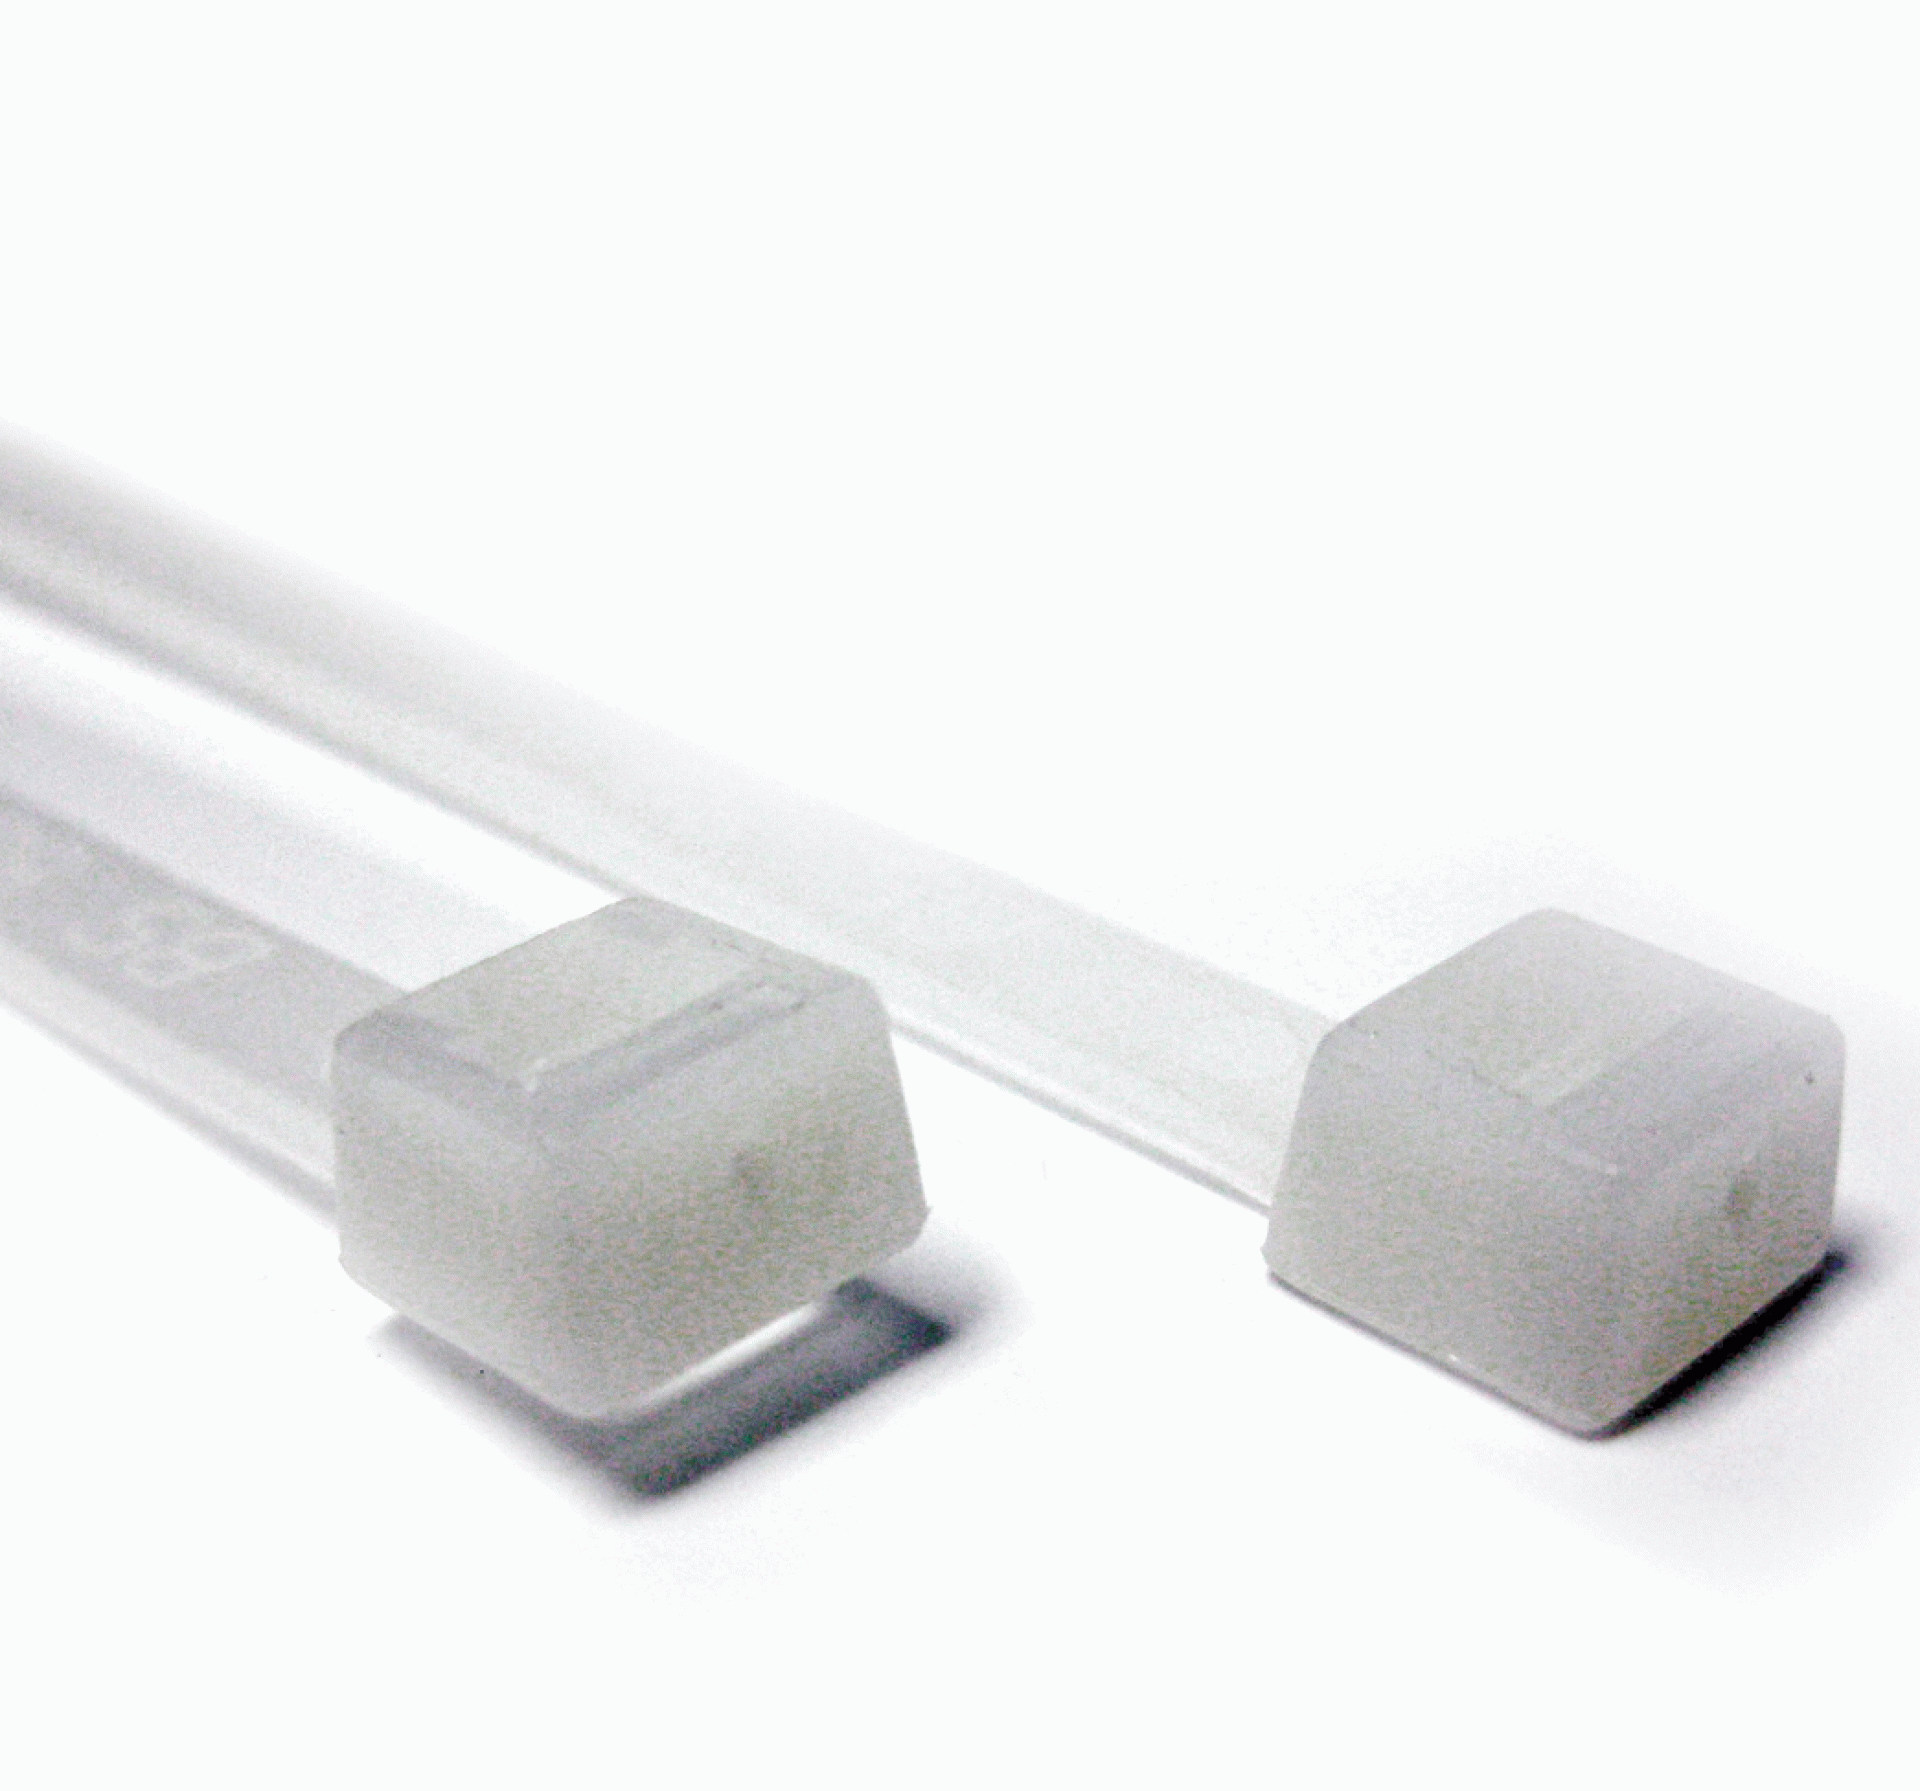 CAMCO MFG INC | 64905 | CABLE TIE 50LB TENSILE STRENGTH 8" LONG .187" WIDE NATURAL 100/PK